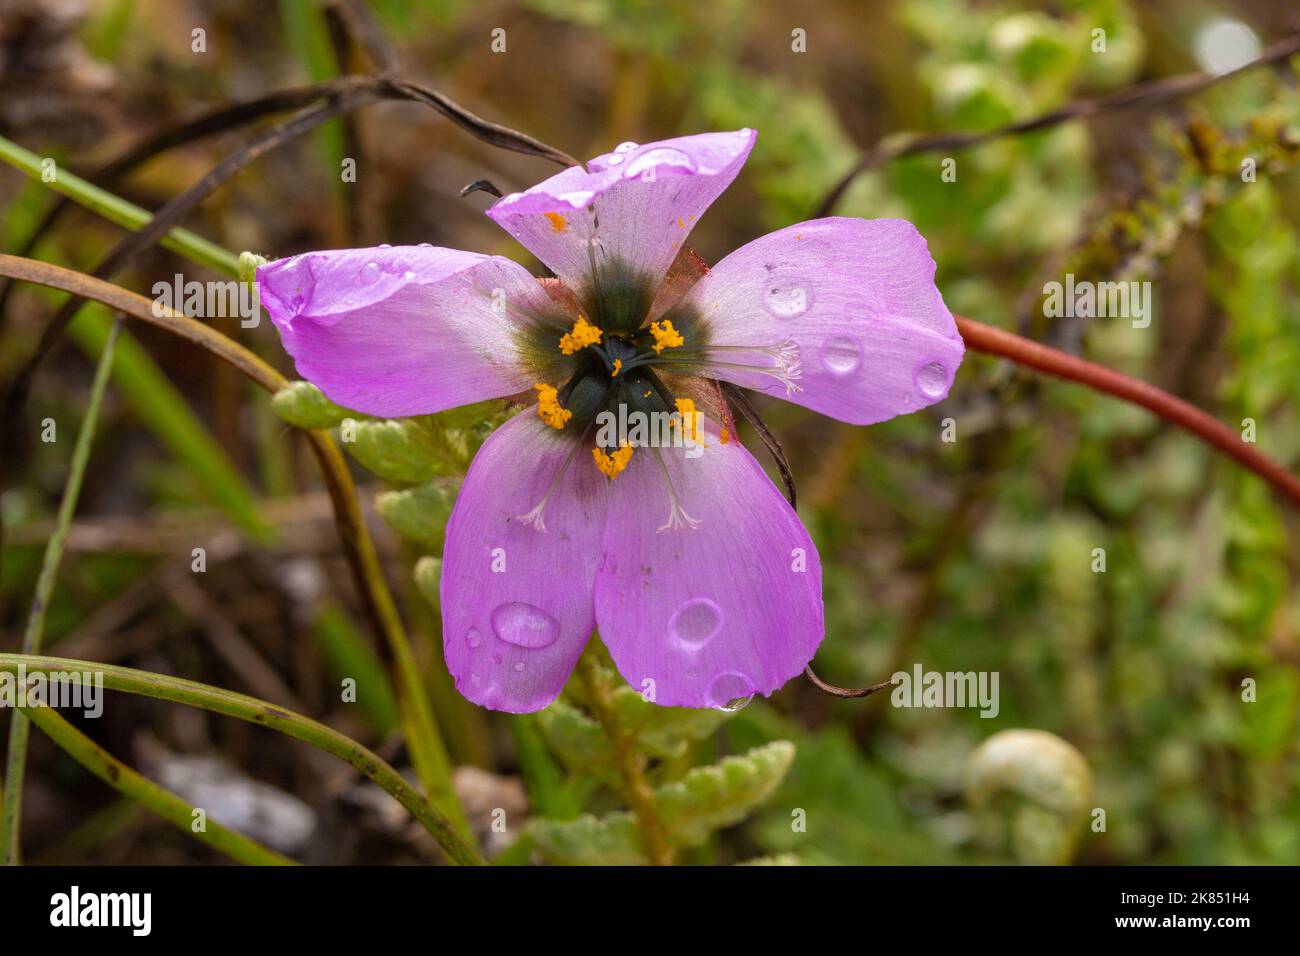 Pink flower of Drosera pauciflora, a sticky carnivorous plant from the Sundew family, taken in natural habitat, view frontal Stock Photo